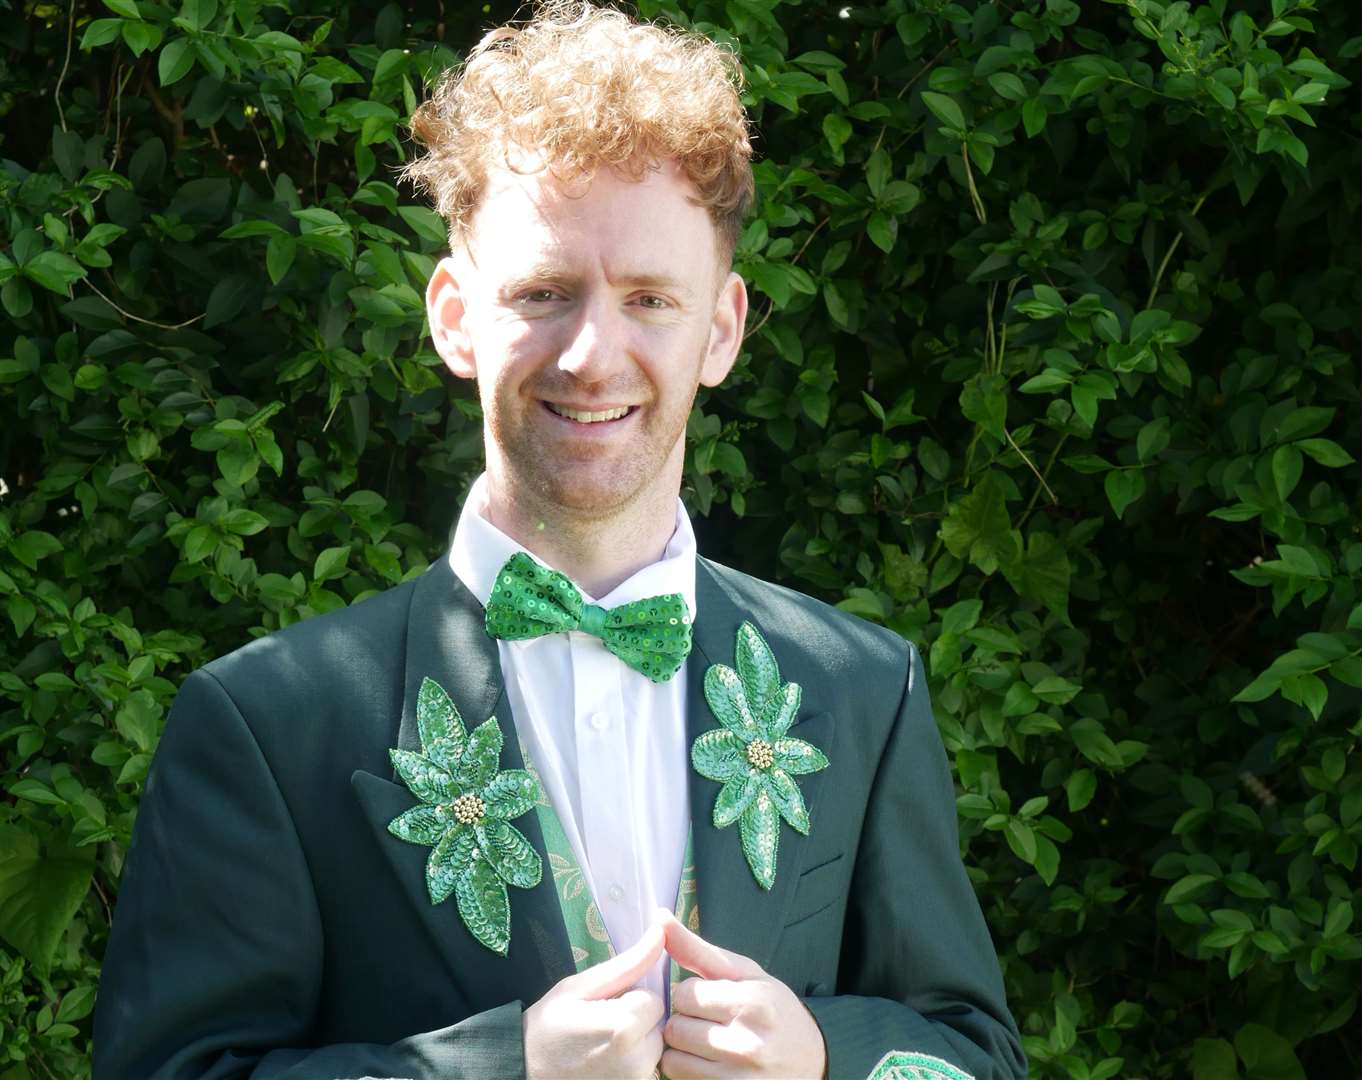 Chris Rankin, best known for his role as Percy Weasley, will play The Wizard of Oz in Sittingbourne this Christmas